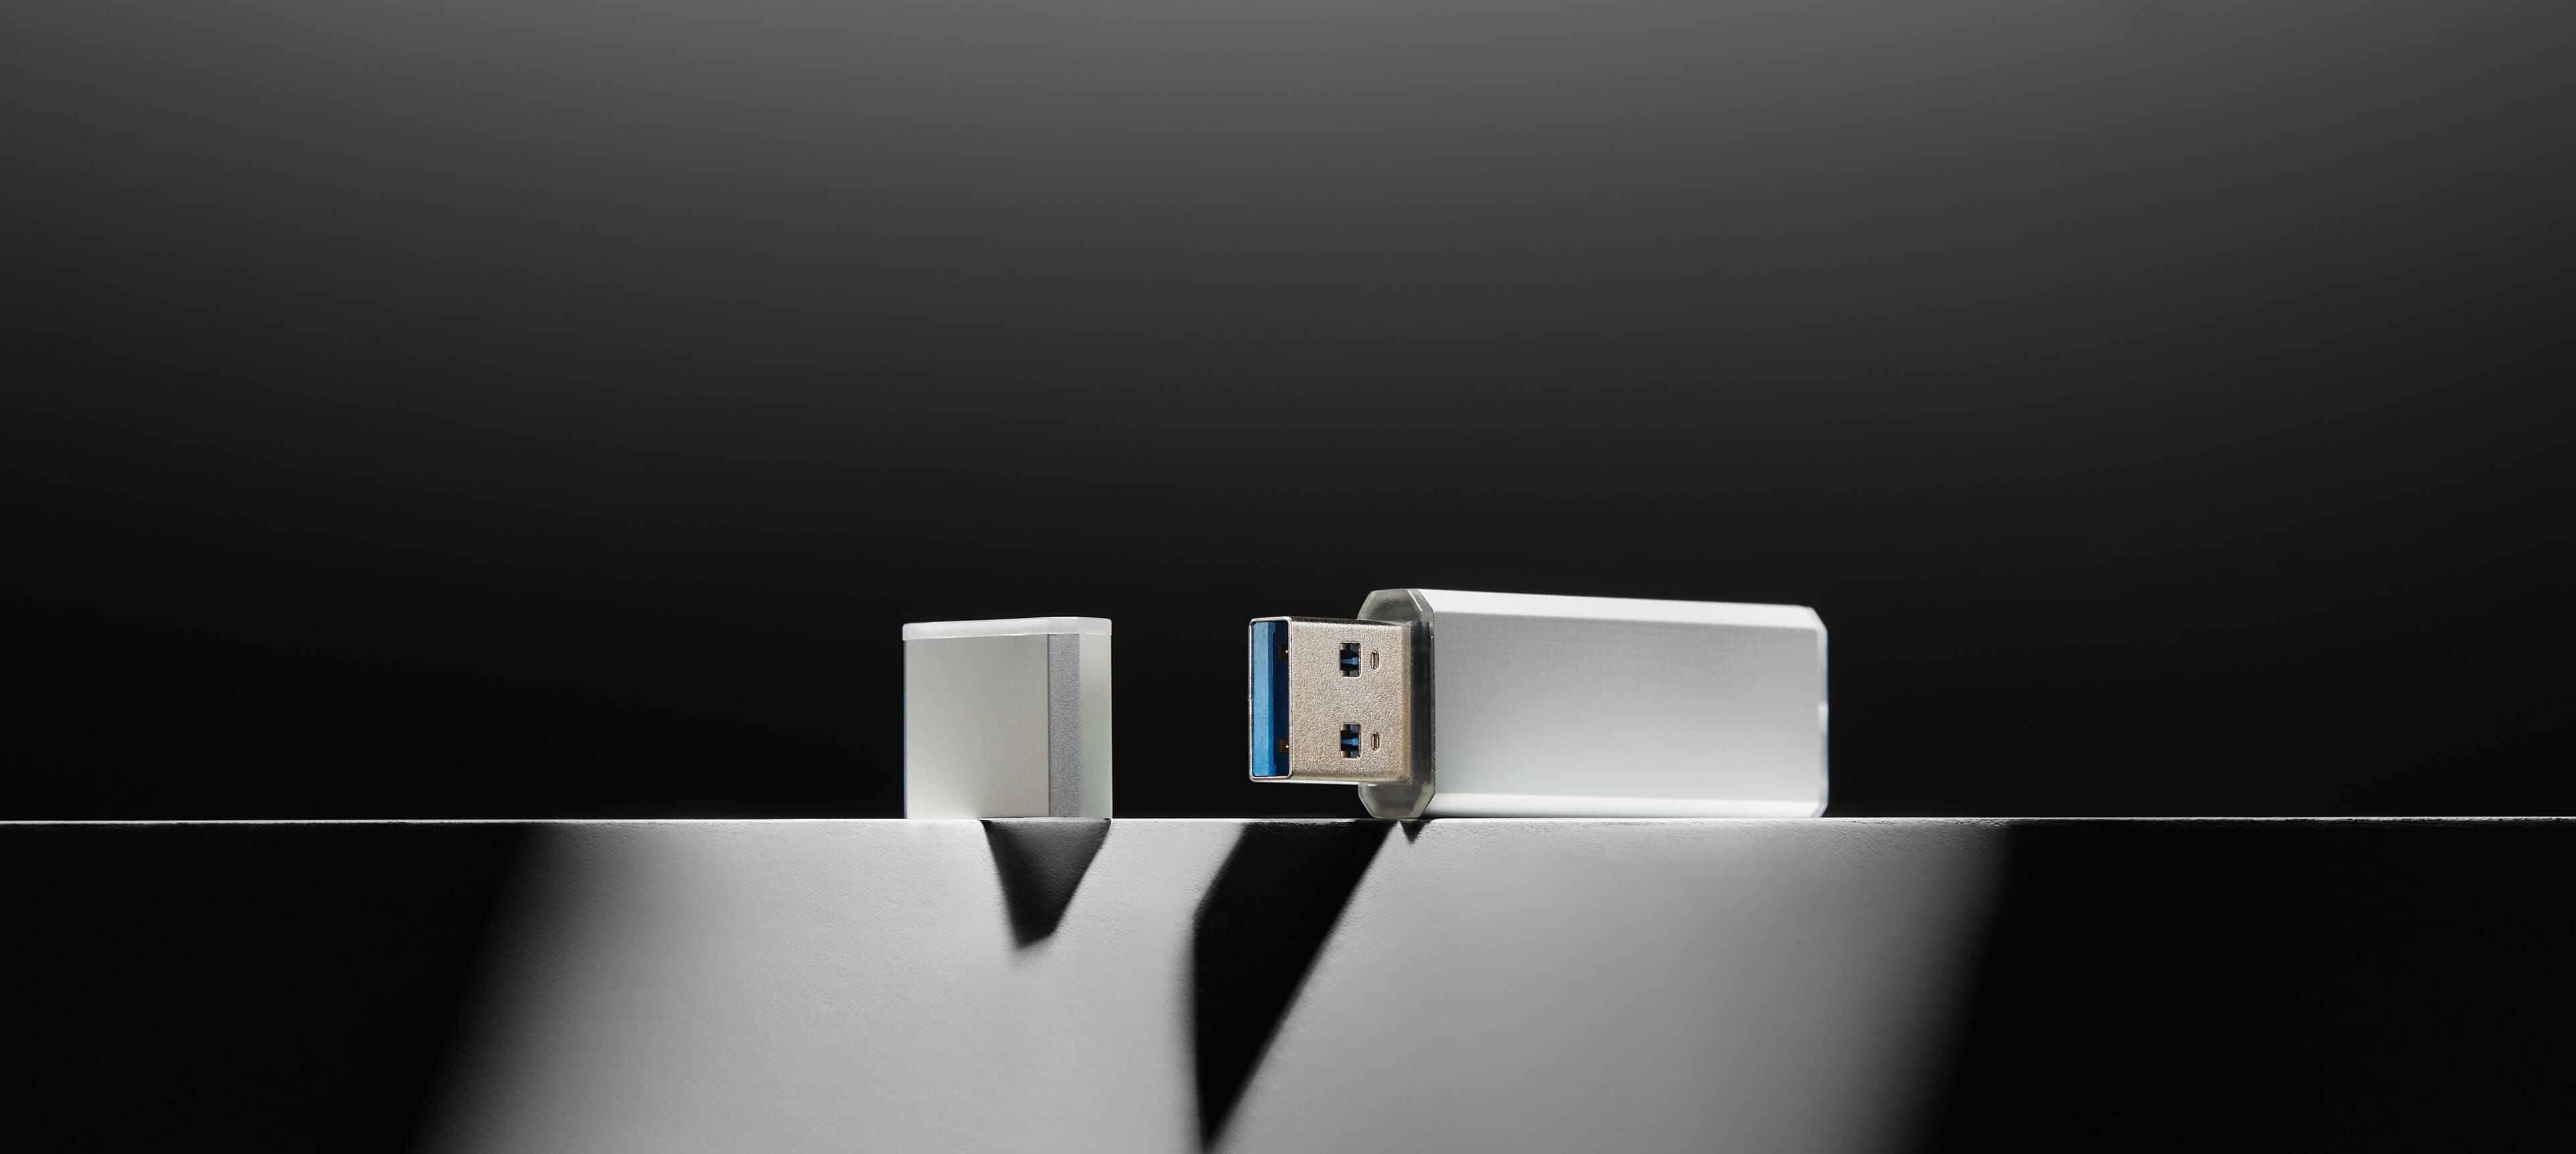 a metal usb drive on a white table